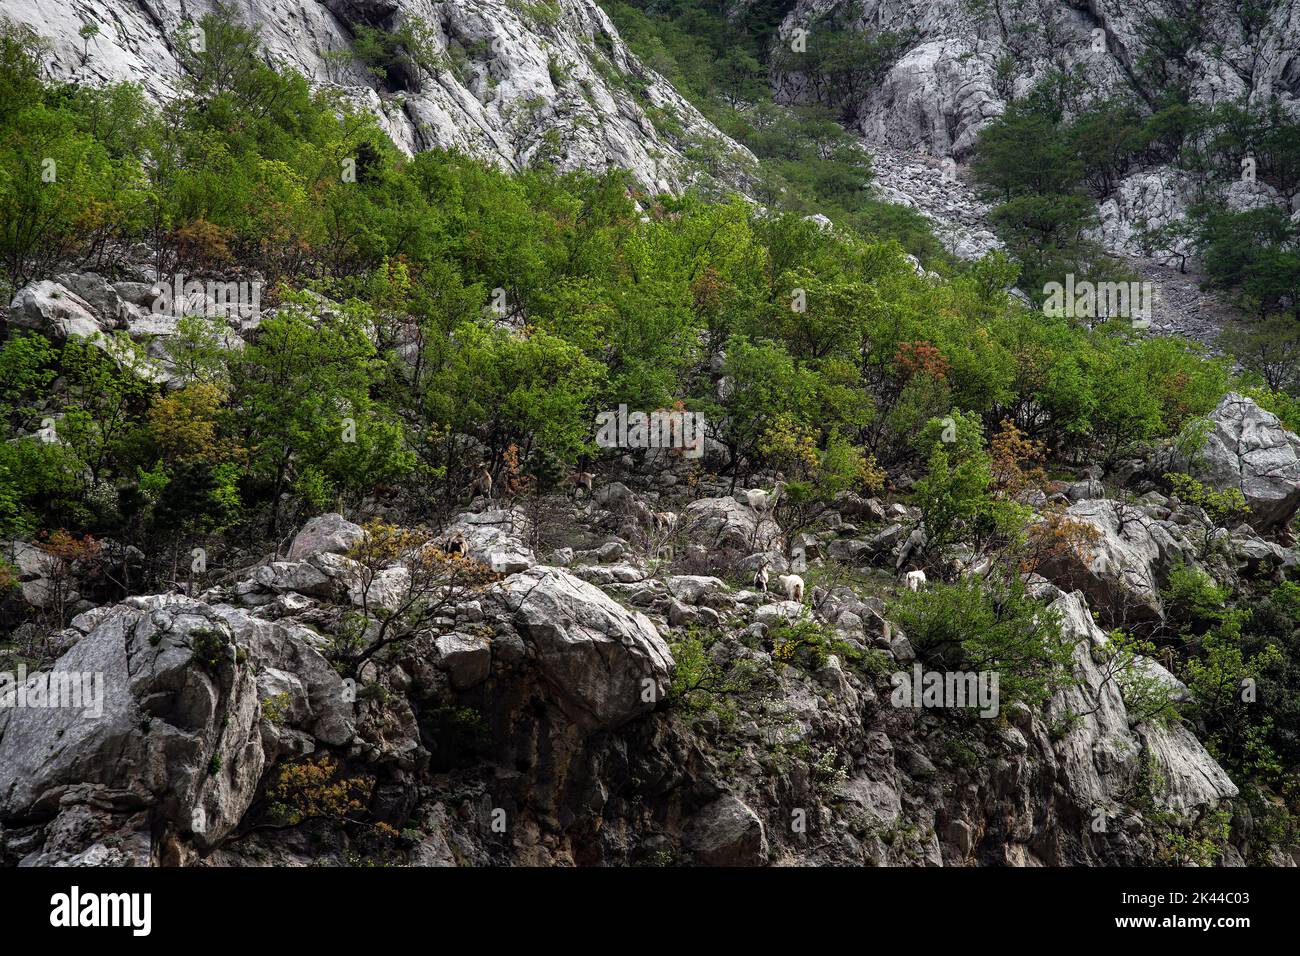 wild goats are feeding in a natural environment located in Paklenica, Croatia Stock Photo